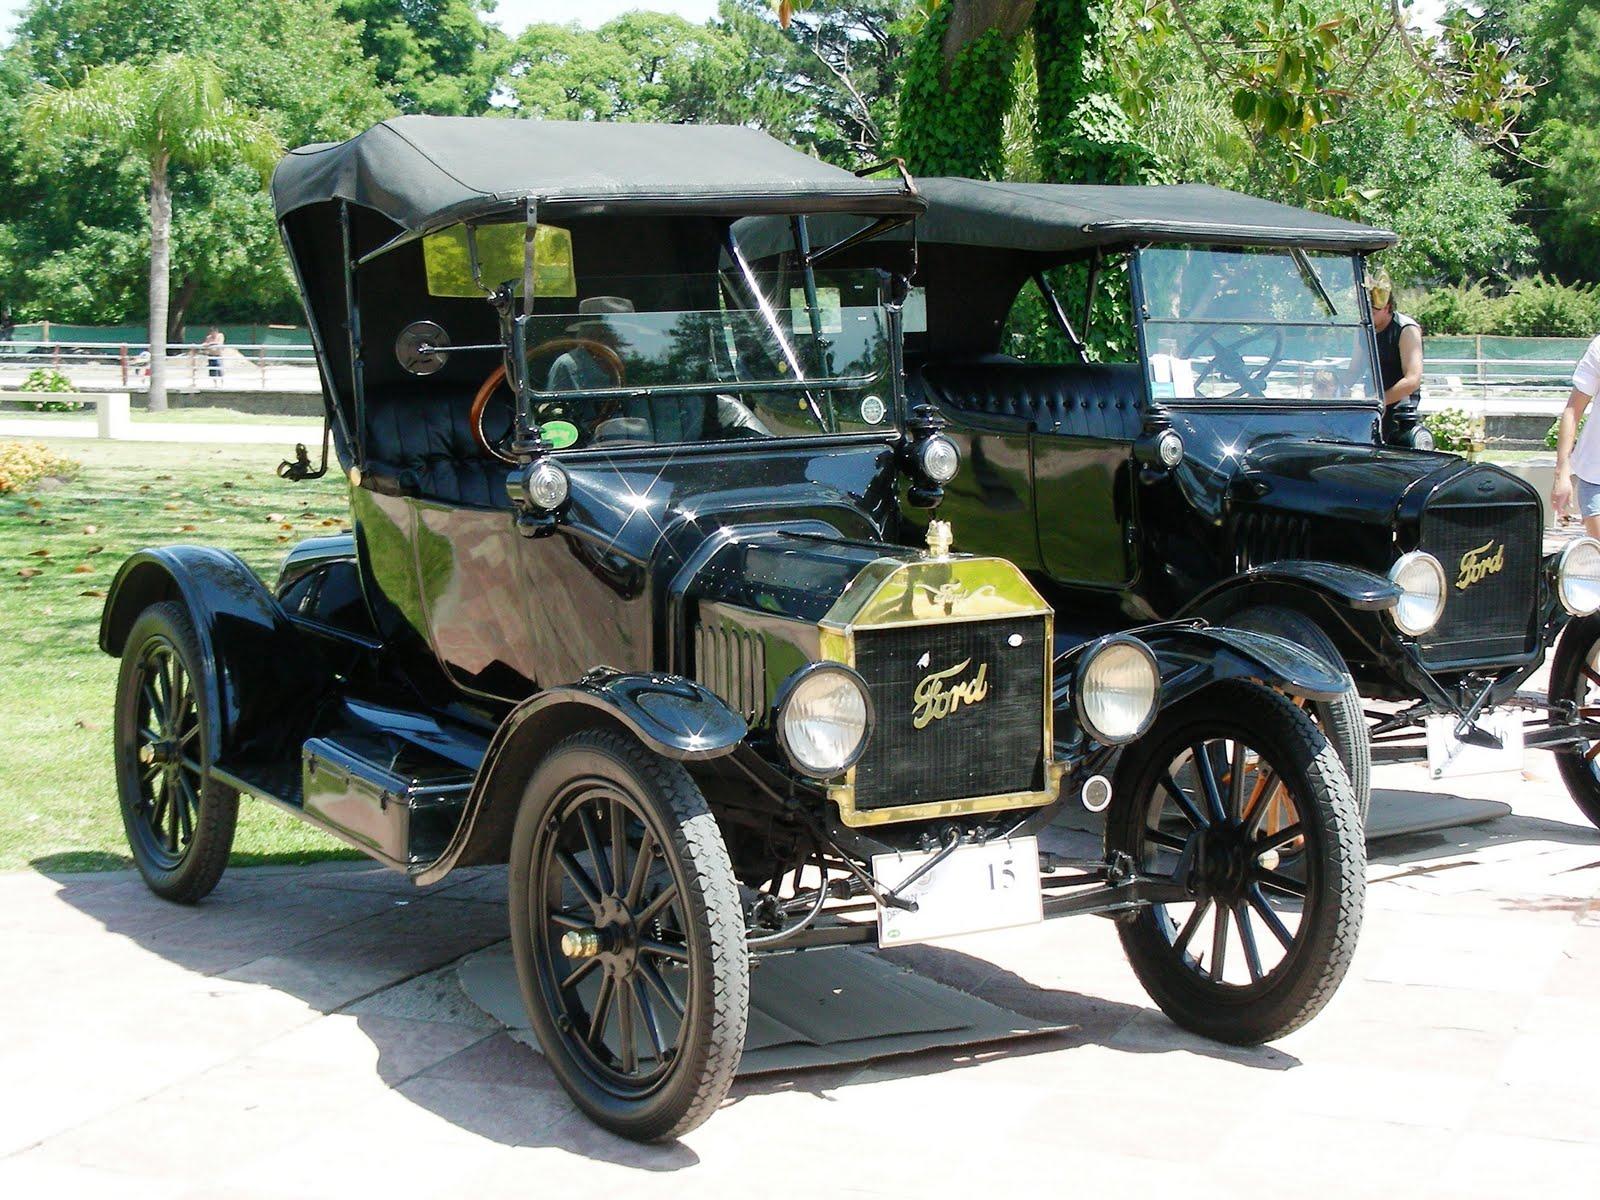 The Ford Model T is one of the most famous cars in history.